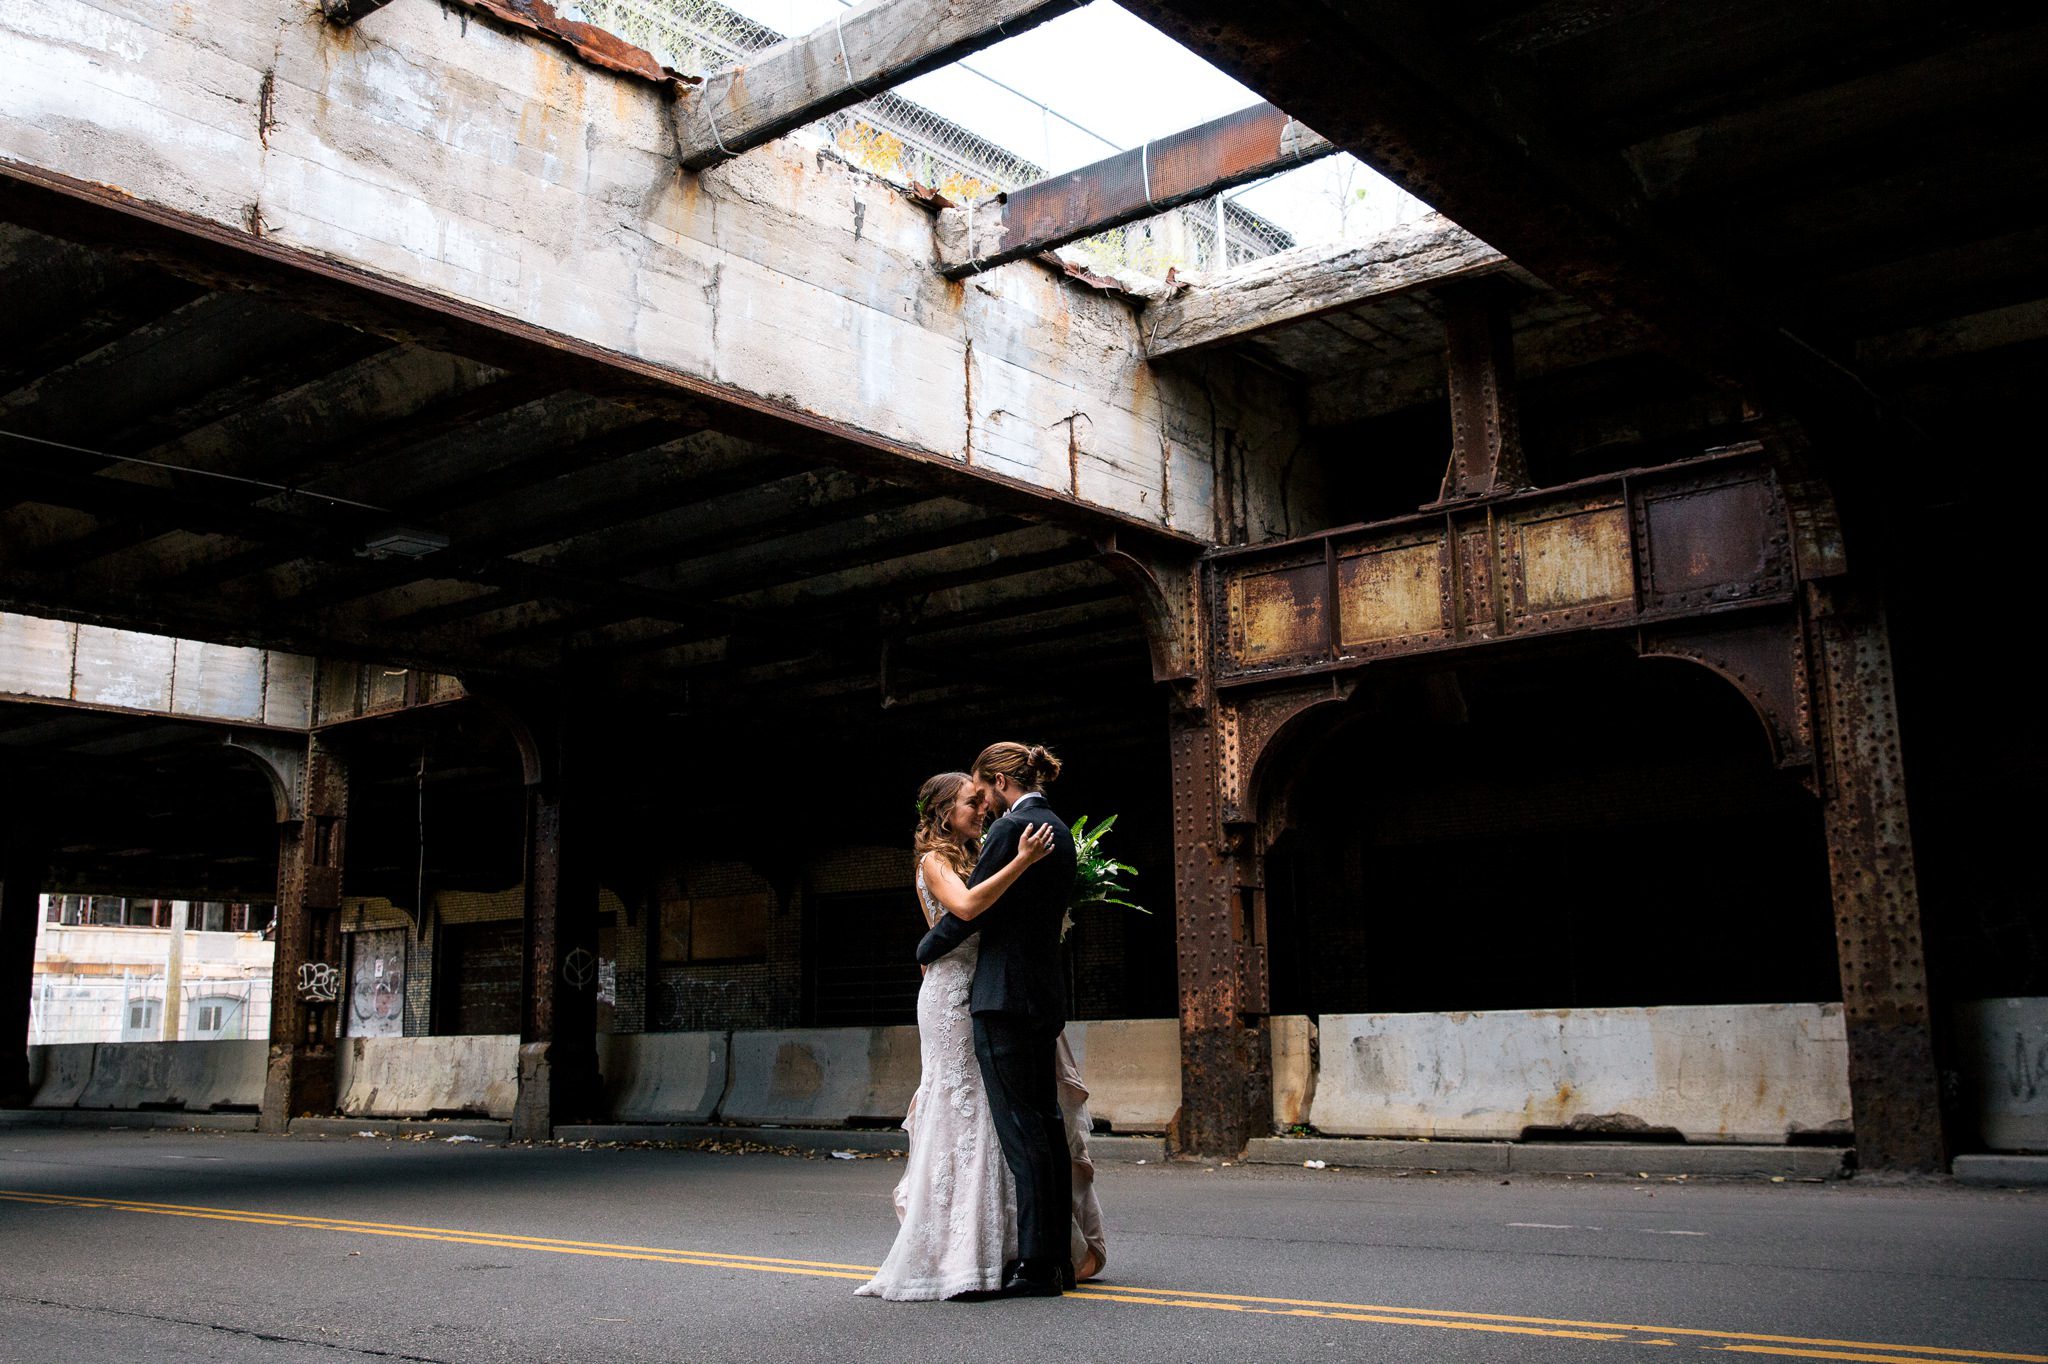 Wedding photo at  the Detroit train station underpass